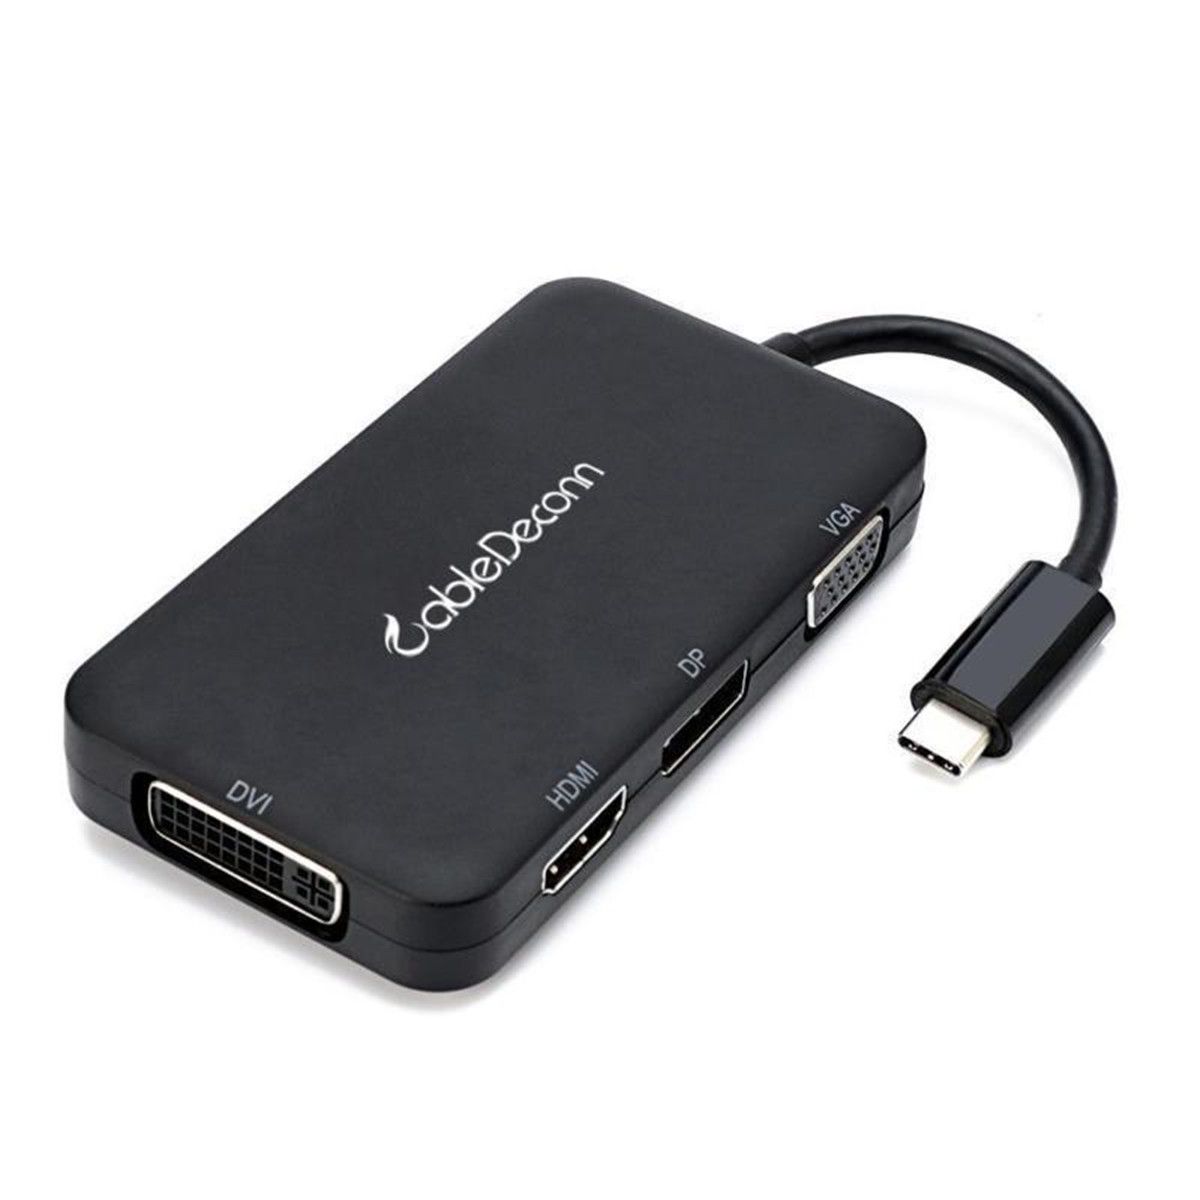 USB-31-Type-C-To-HD-DP-DVI-VGA-4K-Cable-Adapter-4-in-1-Converter-1202186